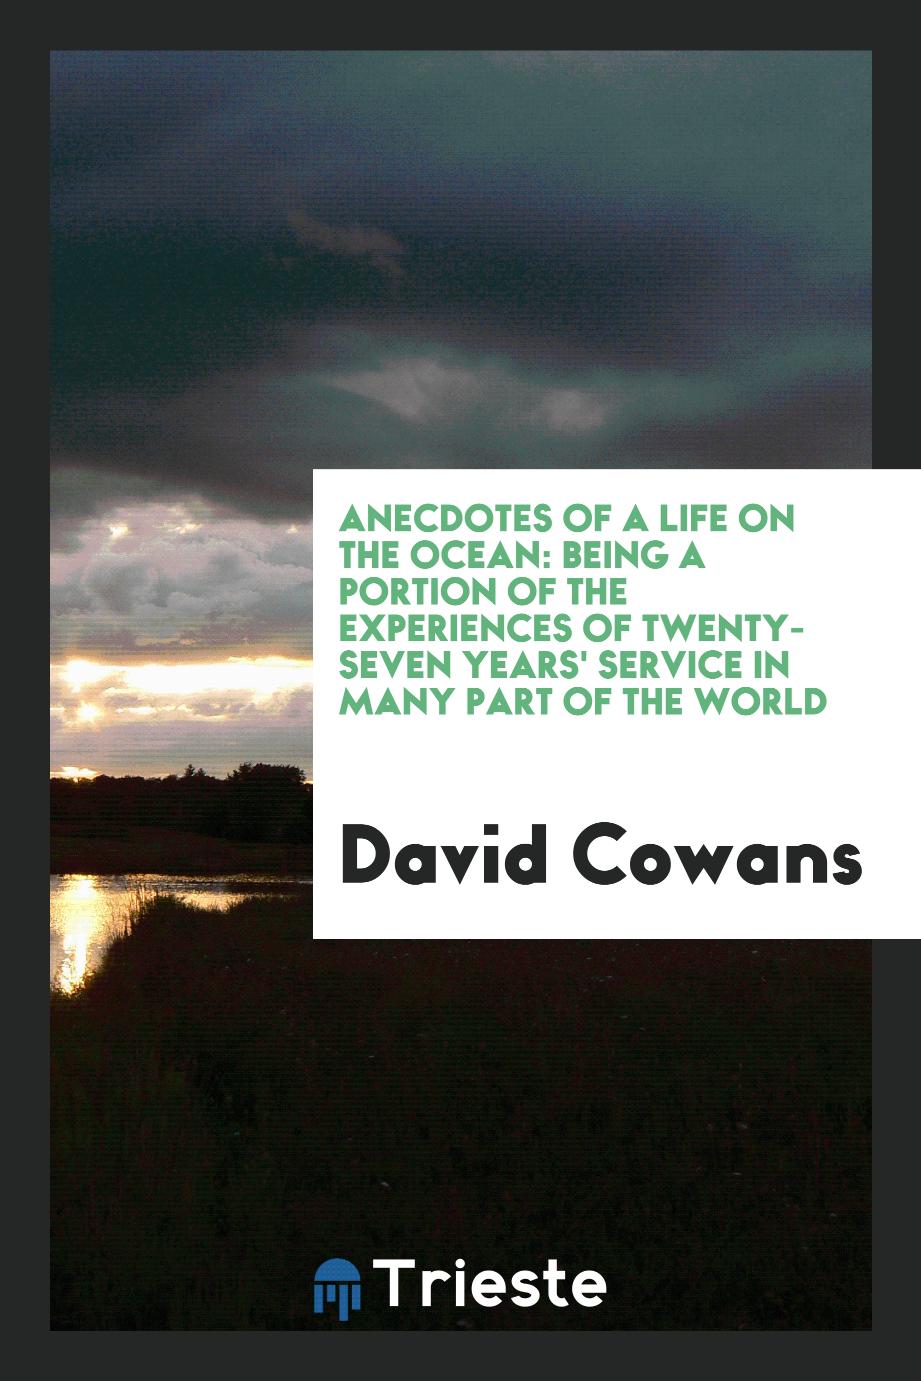 Anecdotes of a Life on the Ocean: Being a Portion of the Experiences of Twenty-Seven Years' Service in Many Part of the World